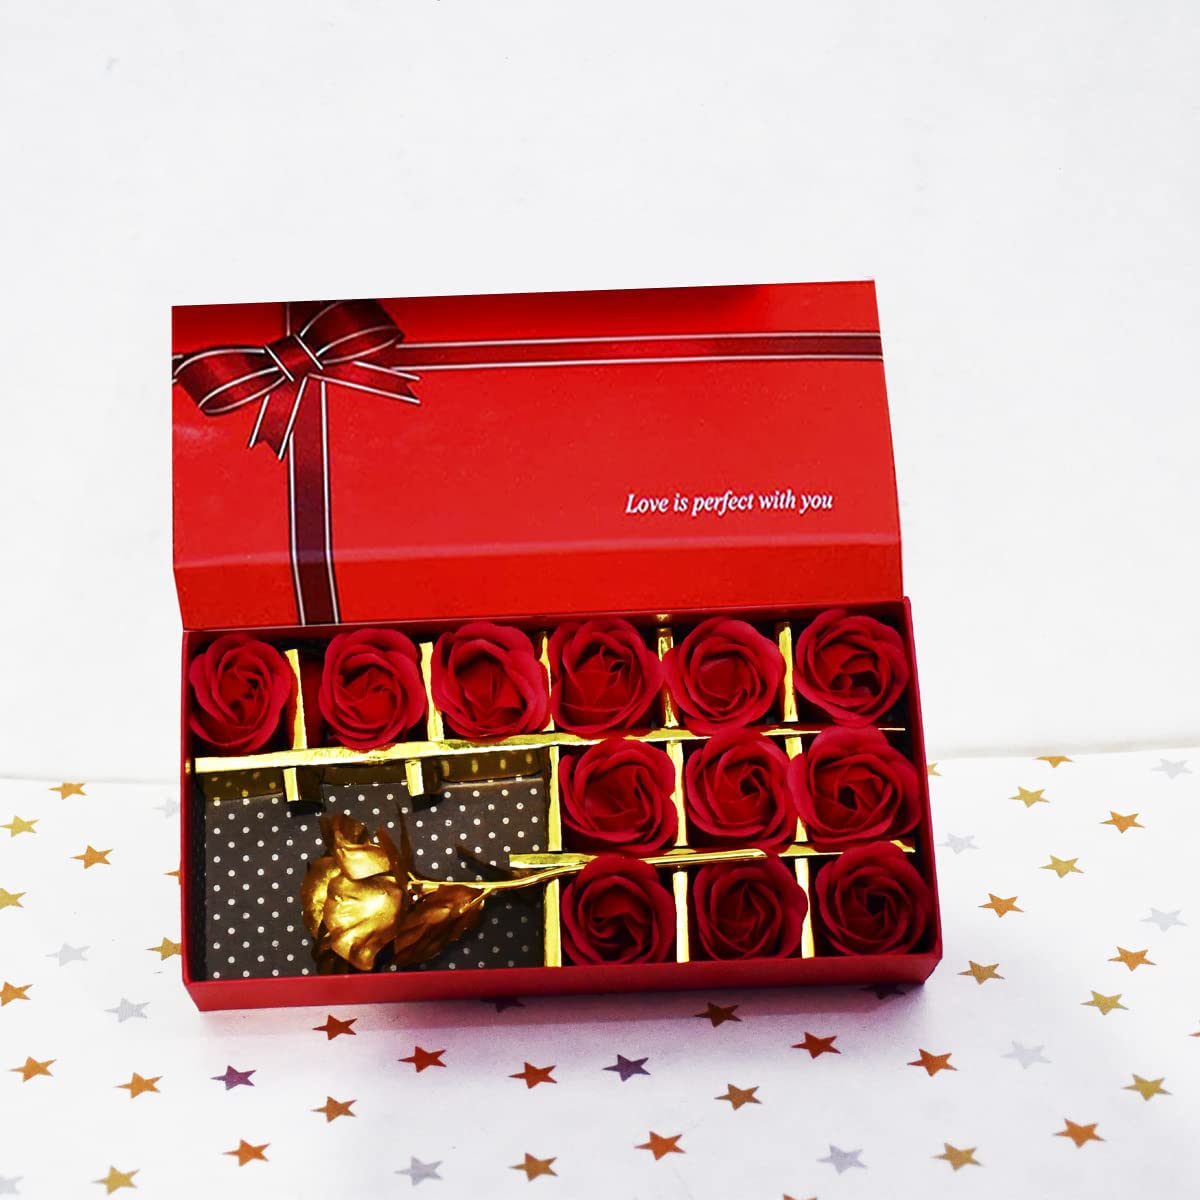 Saugat Traders Sorry Gift For Girlfriend or Boyfriend - Sorry Greeting Card  WIth Sorry Teddy & Handmade Box WIth 5 Chocolates : Amazon.in: Office  Products